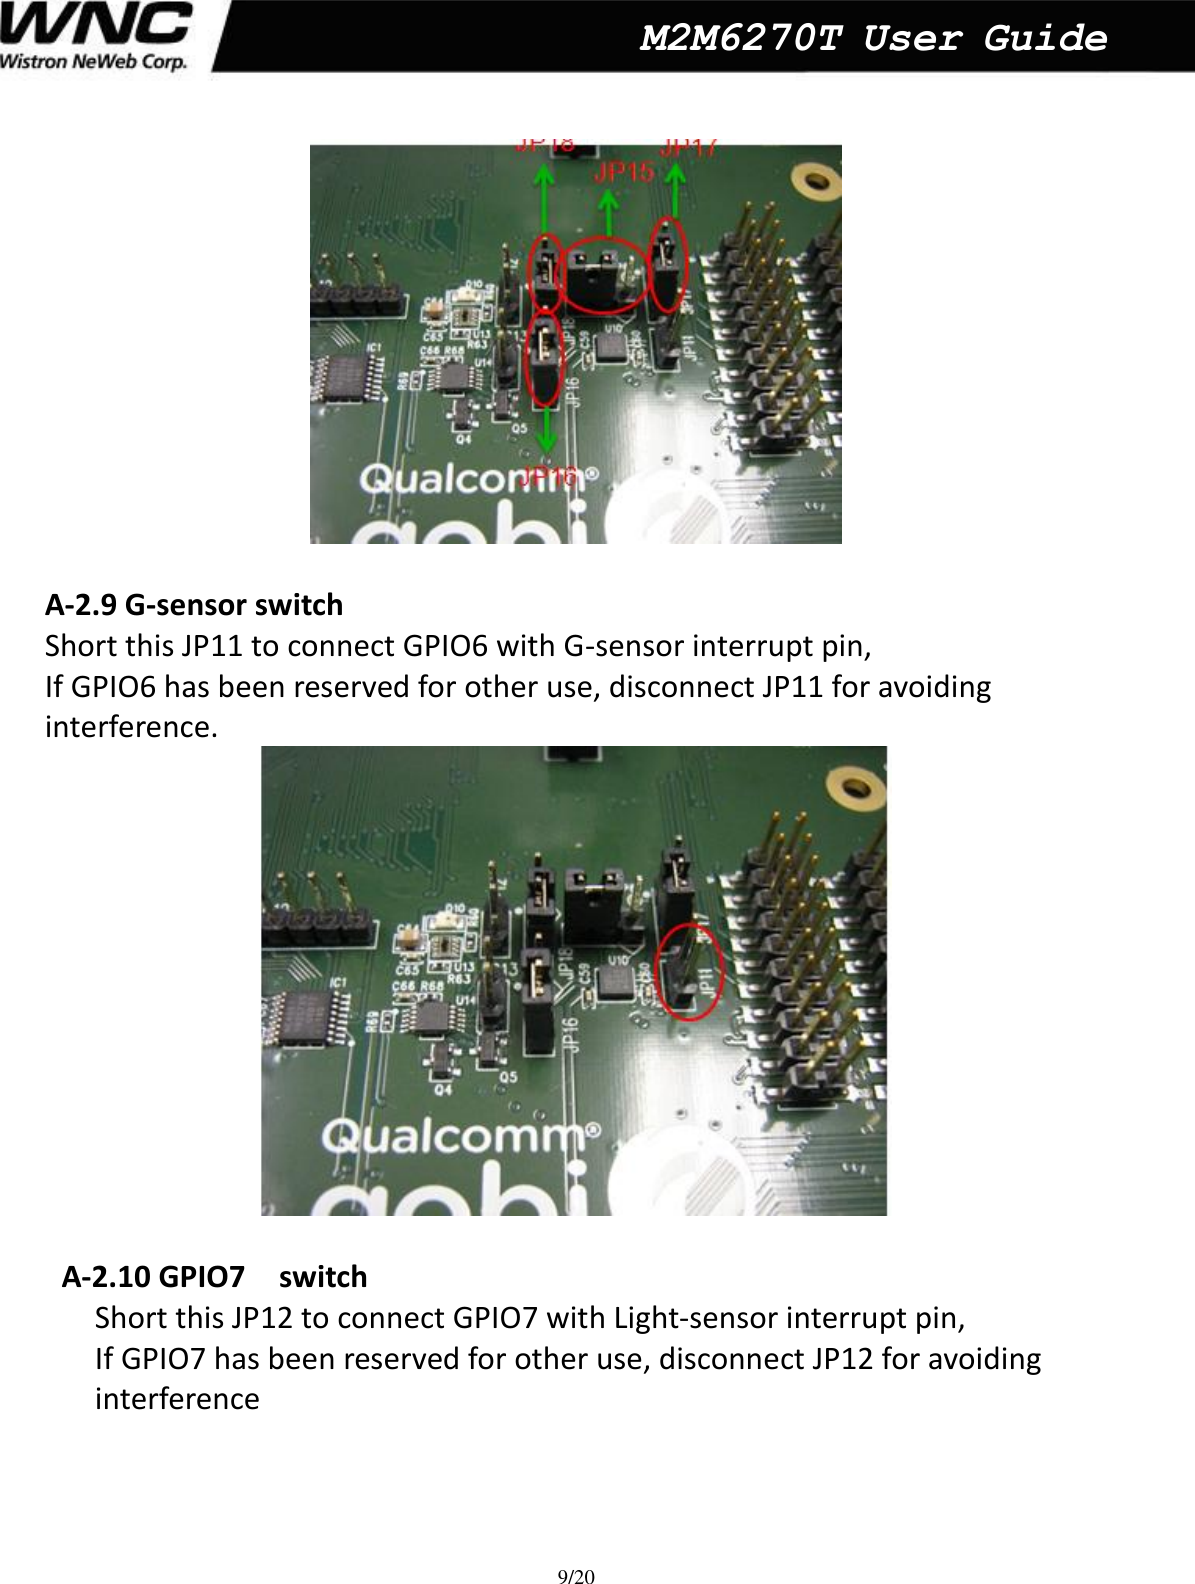  9/20  M2M6270T User Guide   A-2.9 G-sensor switch   Short this JP11 to connect GPIO6 with G-sensor interrupt pin, If GPIO6 has been reserved for other use, disconnect JP11 for avoiding interference.   A-2.10 GPIO7    switch   Short this JP12 to connect GPIO7 with Light-sensor interrupt pin, If GPIO7 has been reserved for other use, disconnect JP12 for avoiding interference  